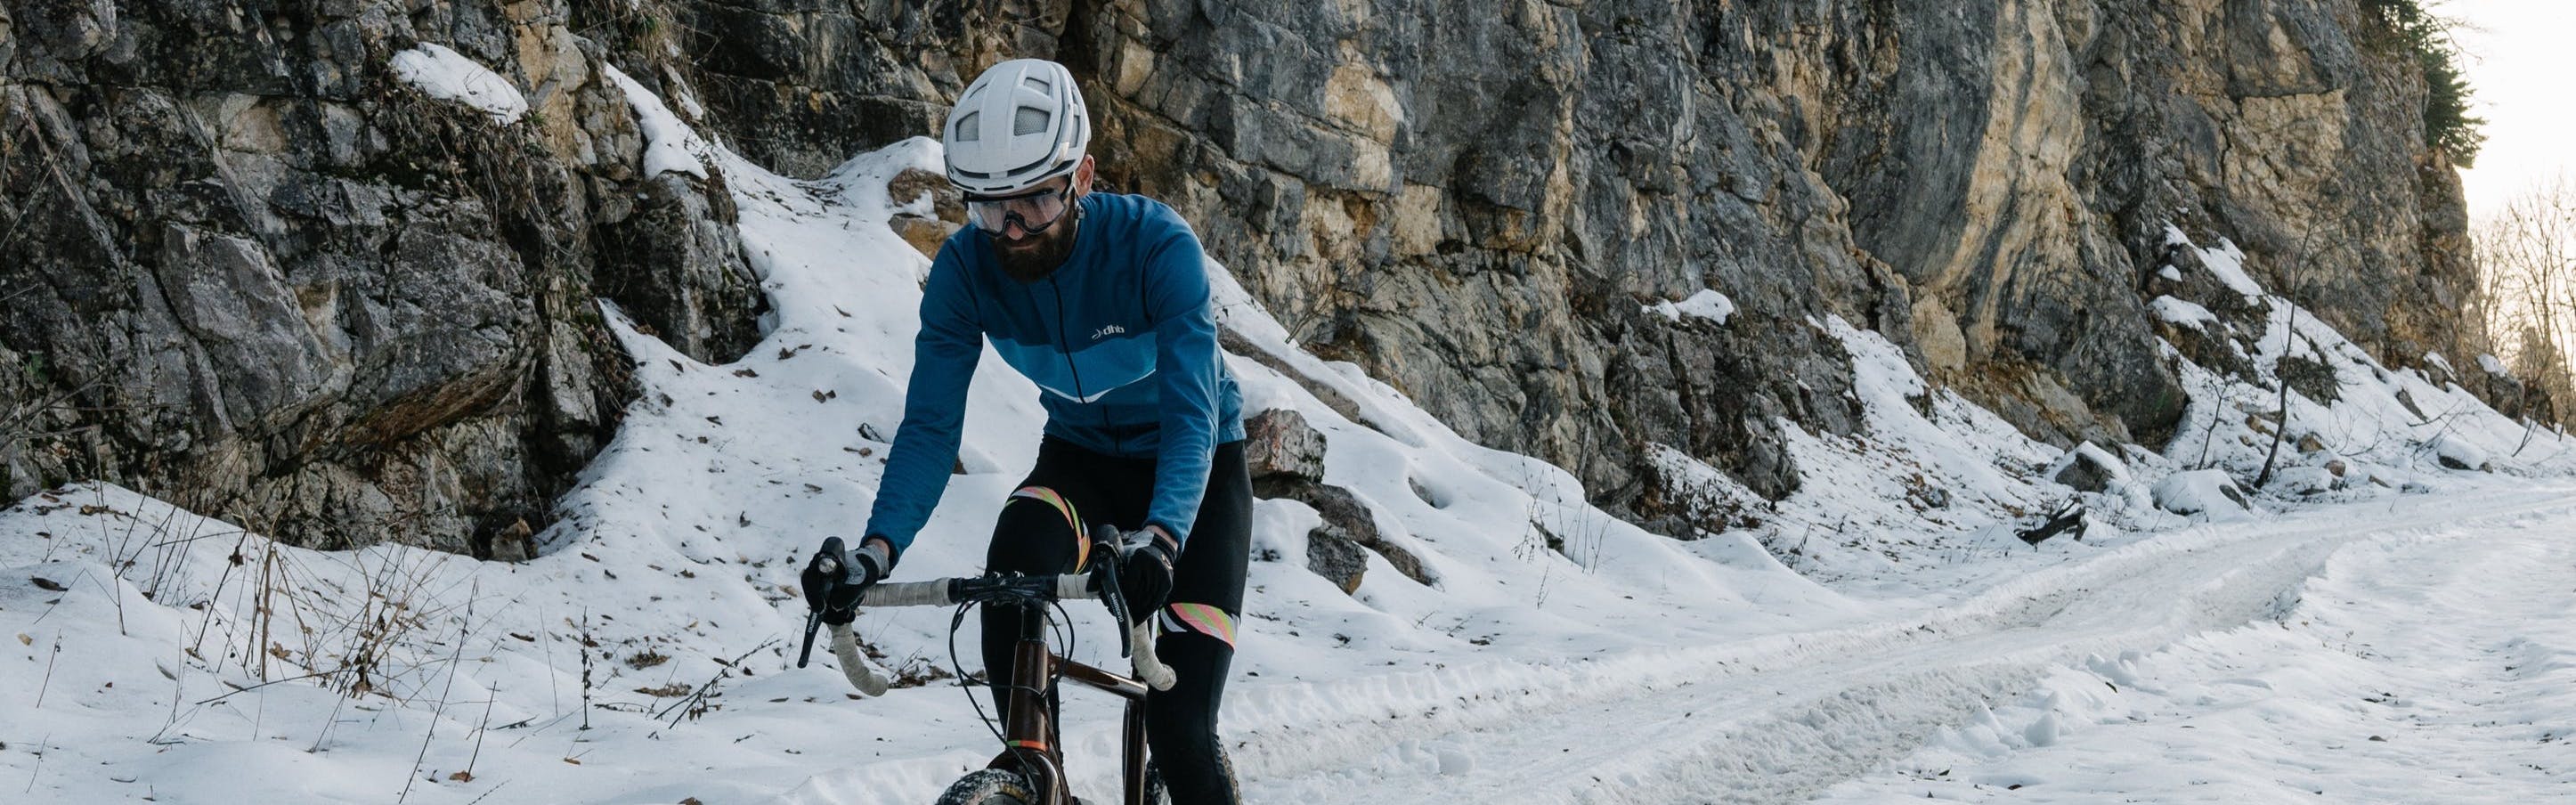 Biking in Cold Weather – An Expert Guide to Winter Cycling Gear